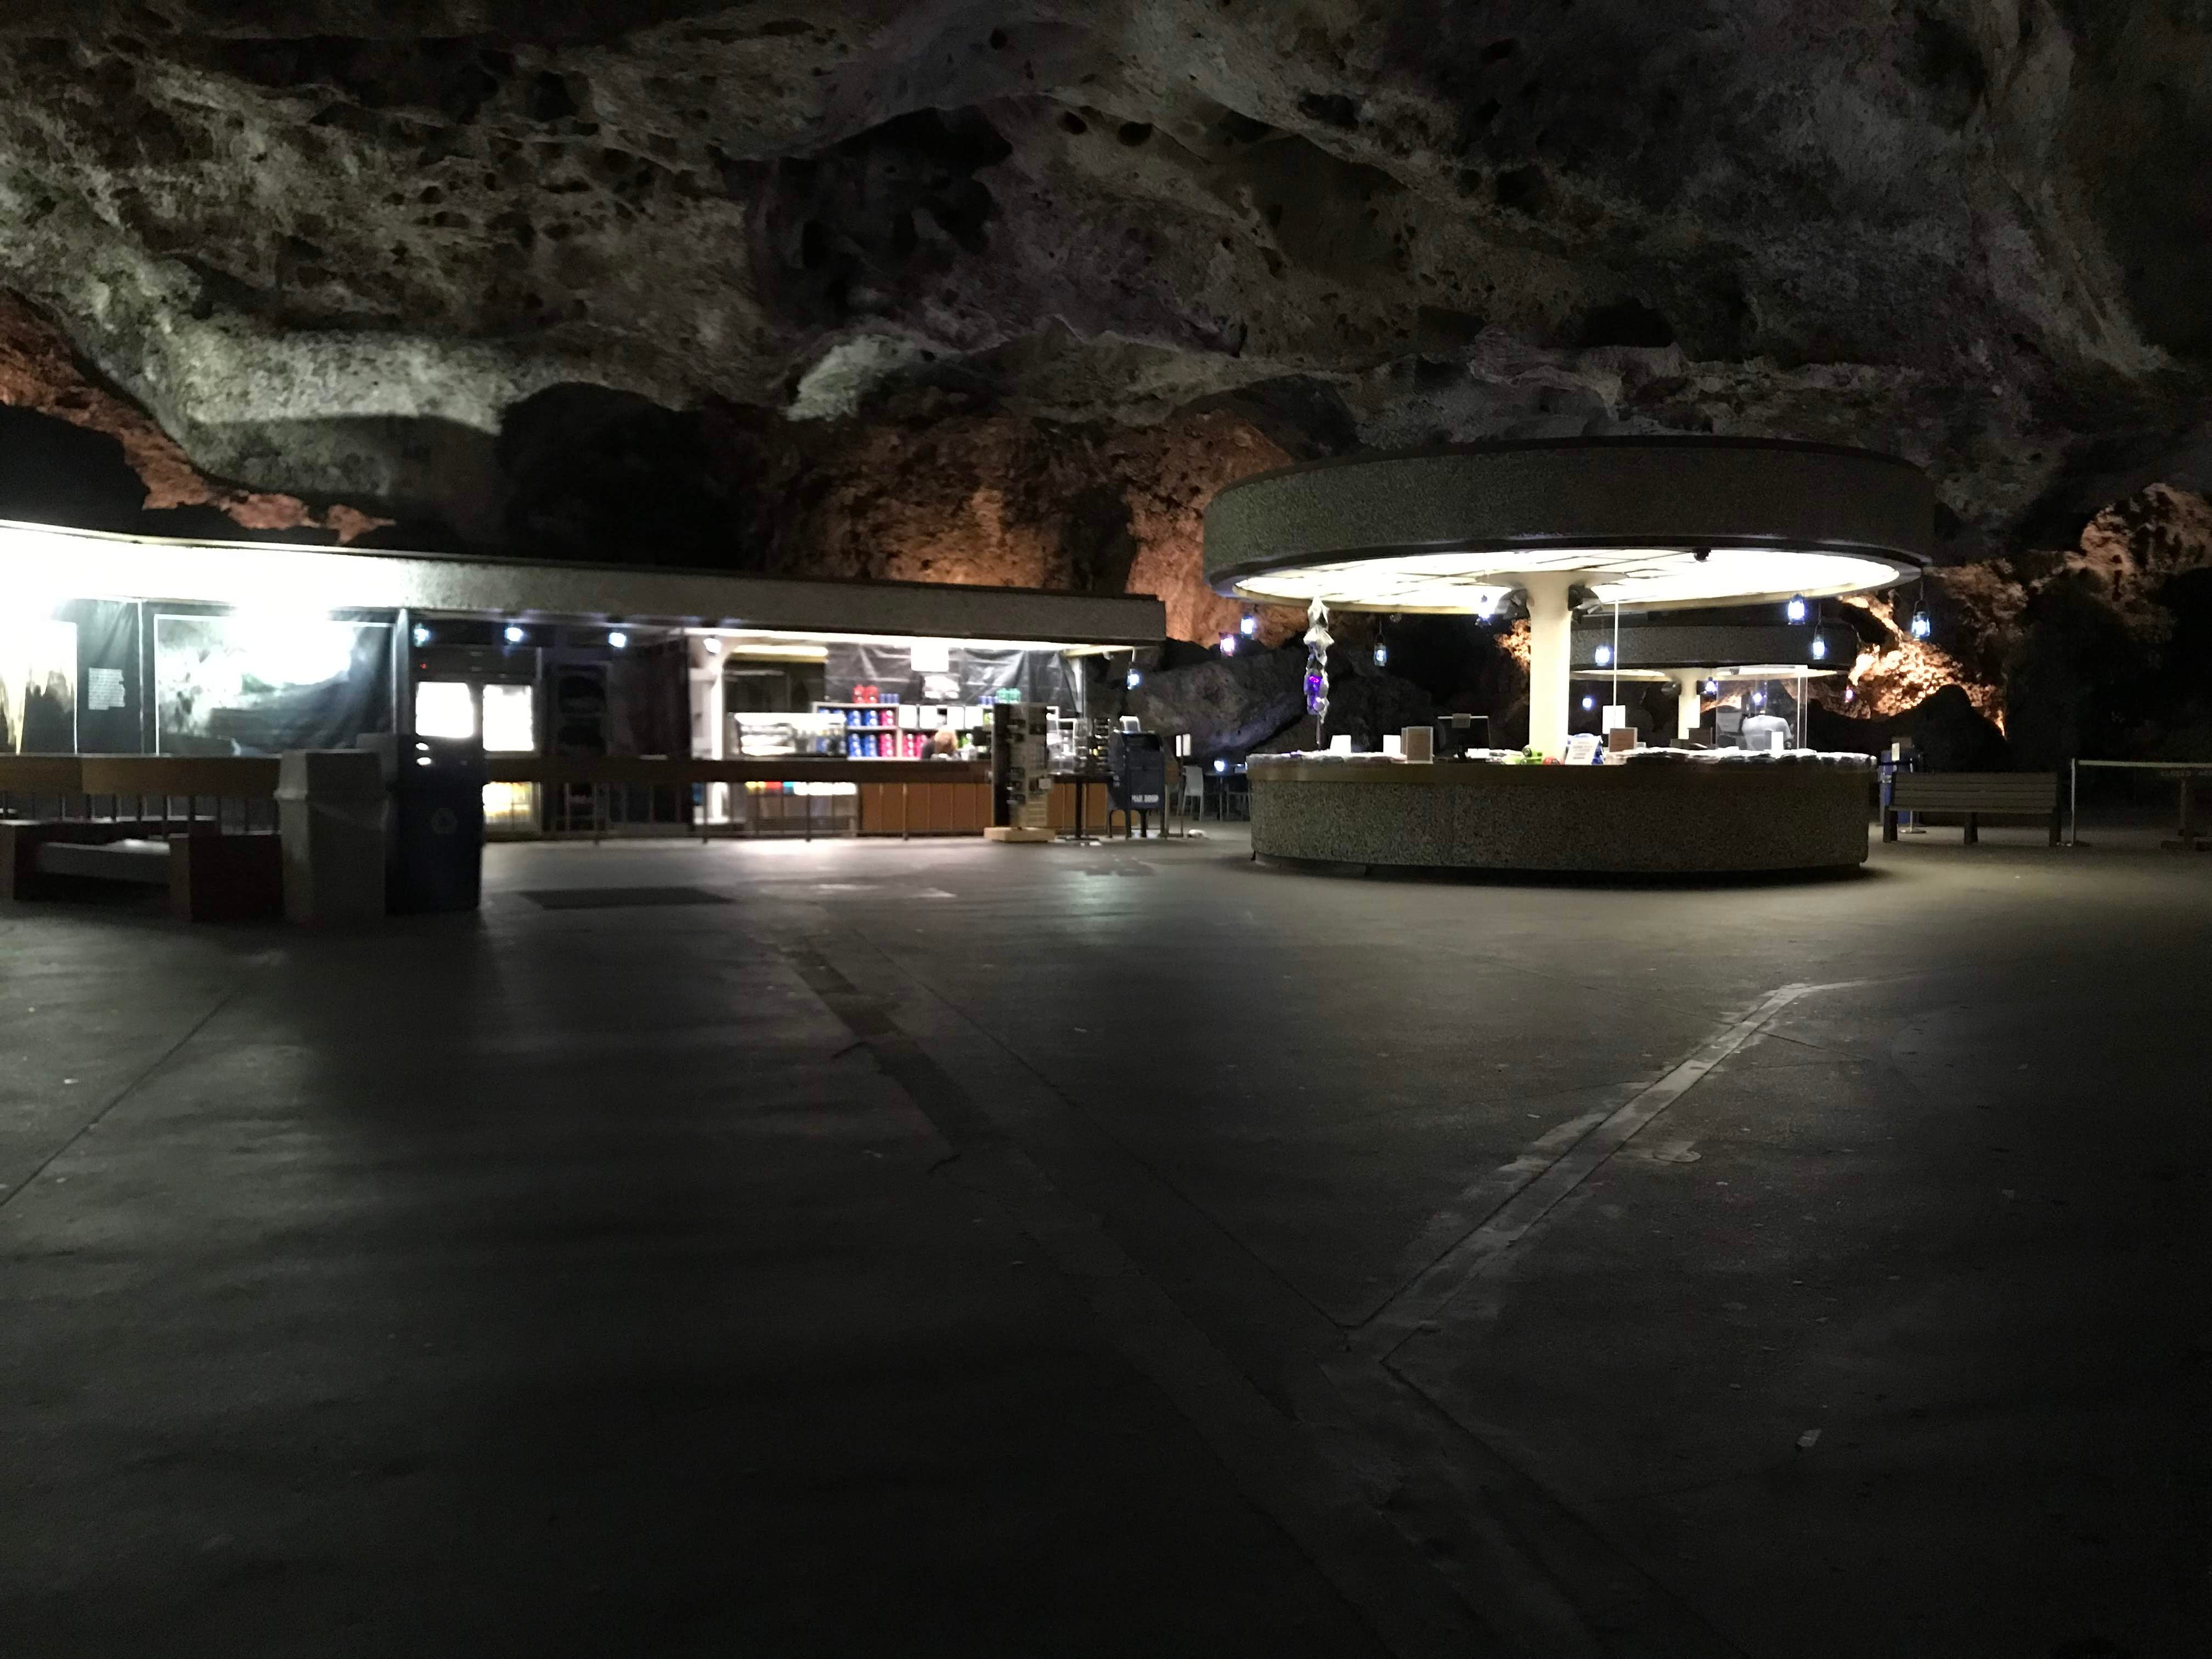 There is a kiosk inside the caverns